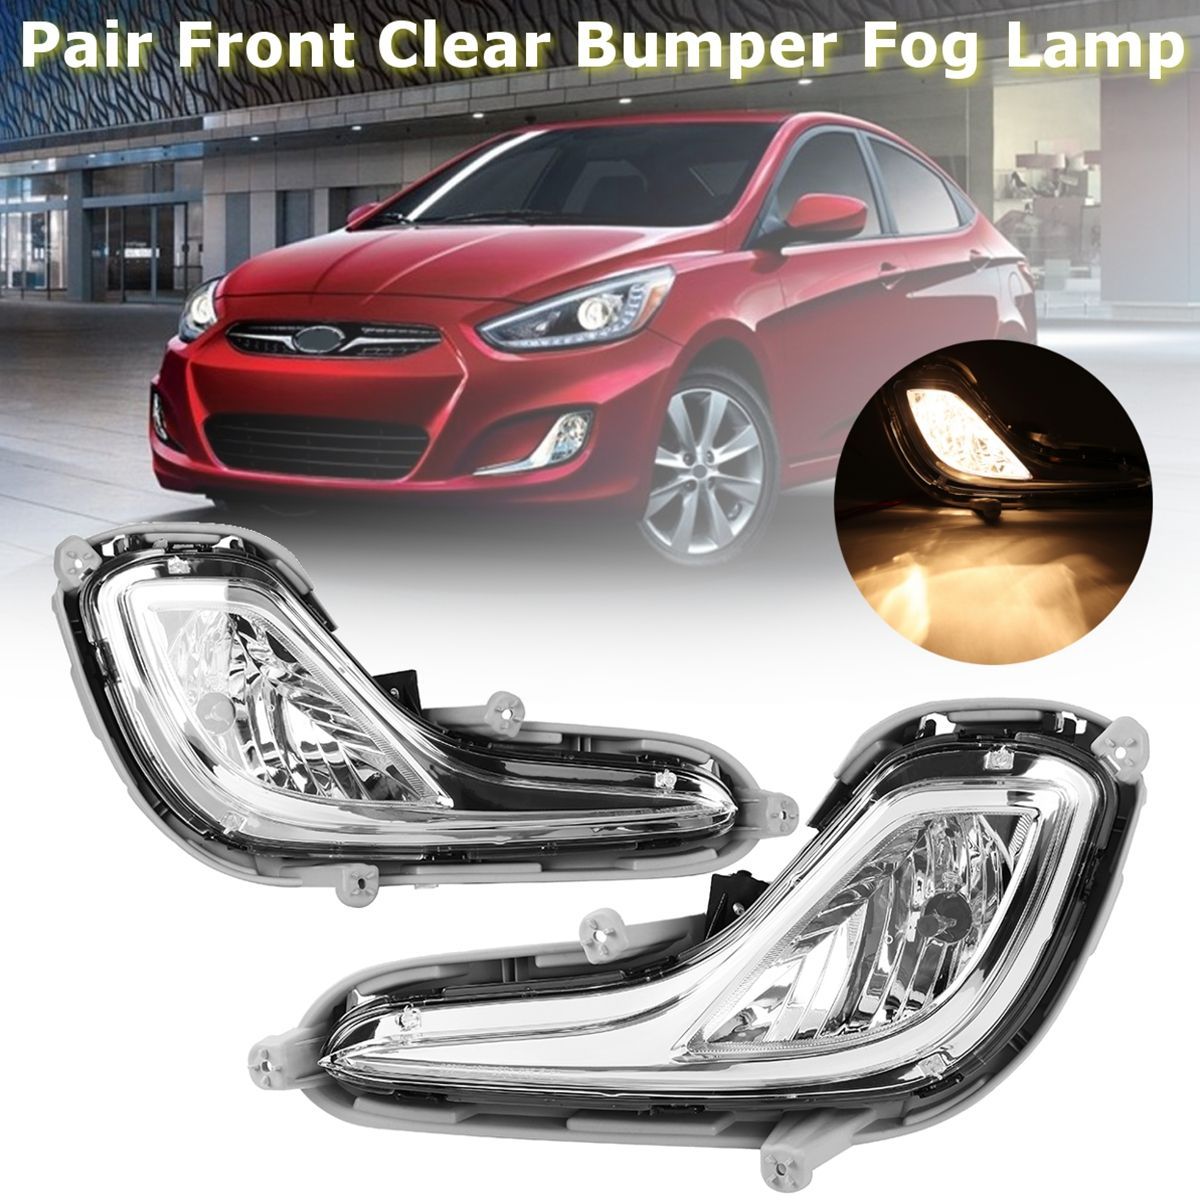 A-Pair-12V-Left-Right-Front-Clear-Bumper-Car-Fog-Lights-Lamps-for-Hyundai-Accent-2012-2014-1281440